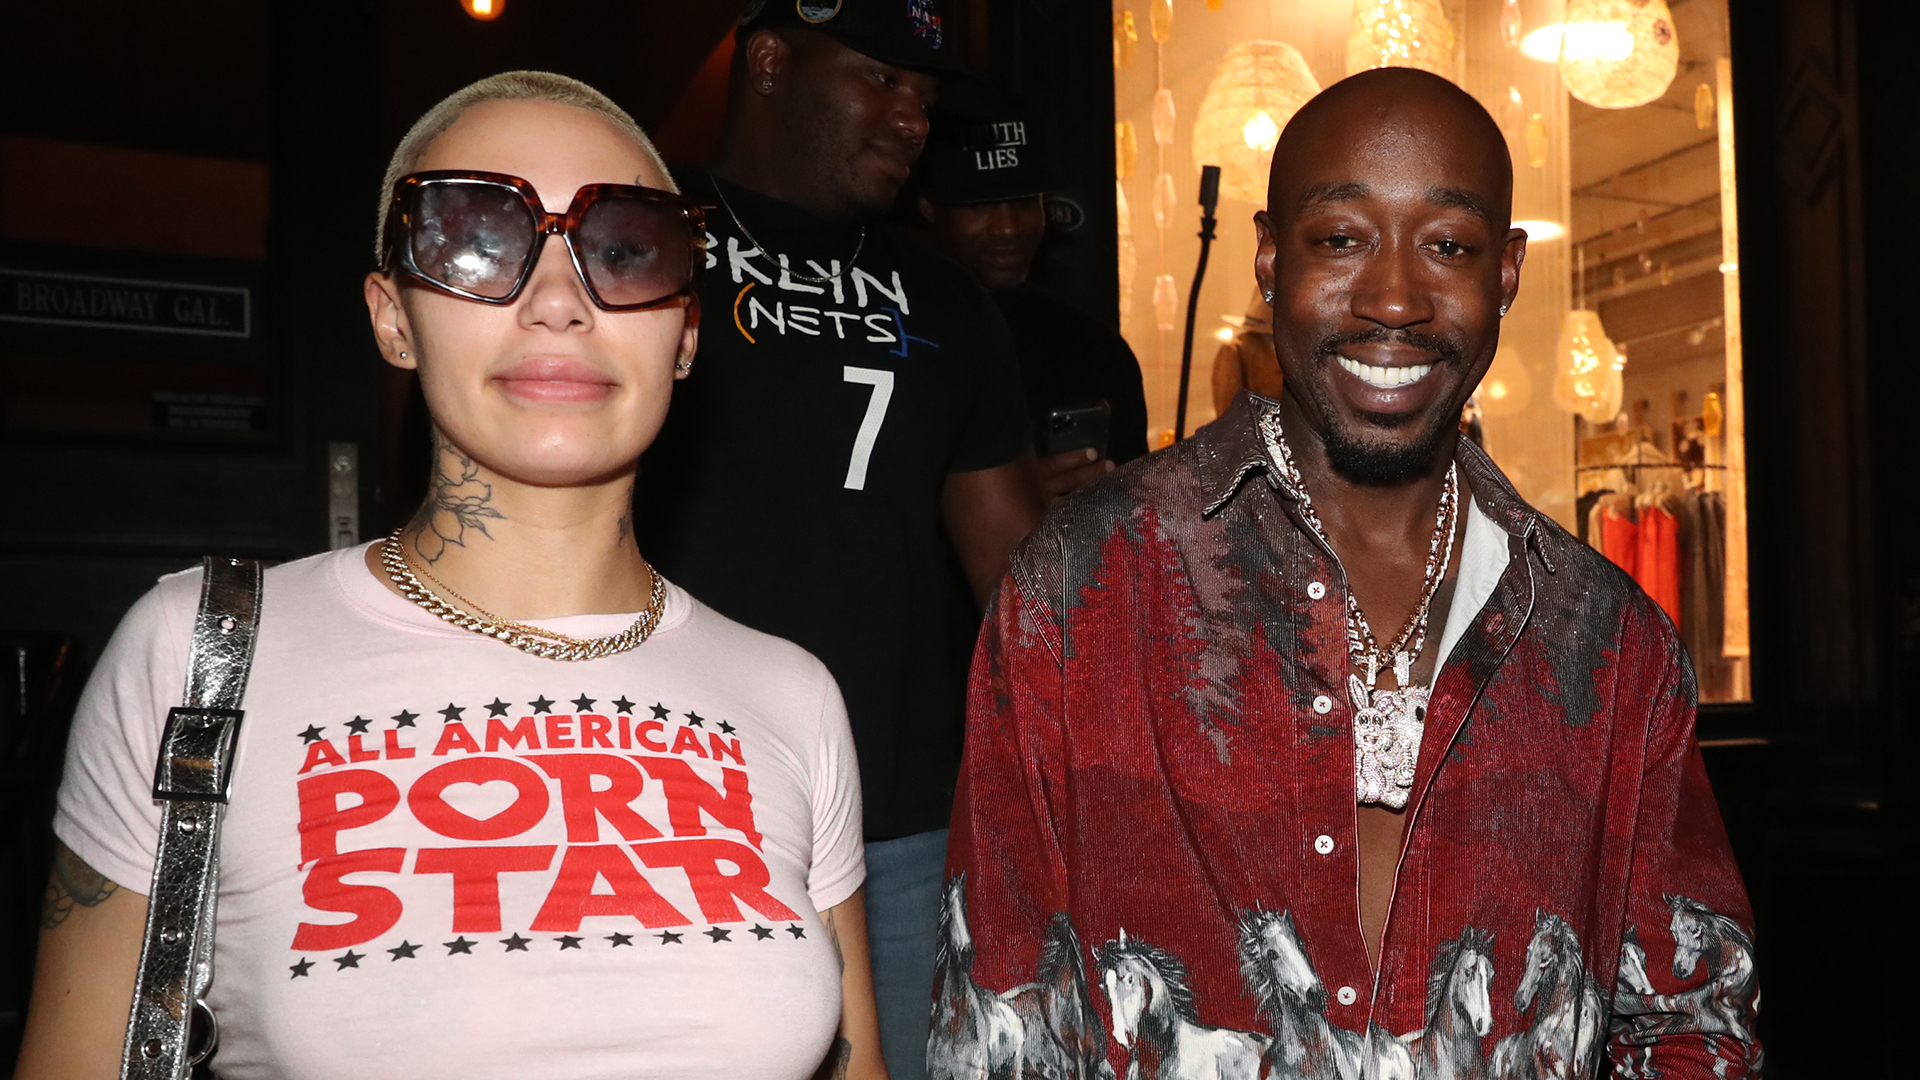 Freddie Gibbs Ex Claims She Stopped Paying His Phone Bill Once He Ghosted Her After Finding Out She Was Pregnant Complex